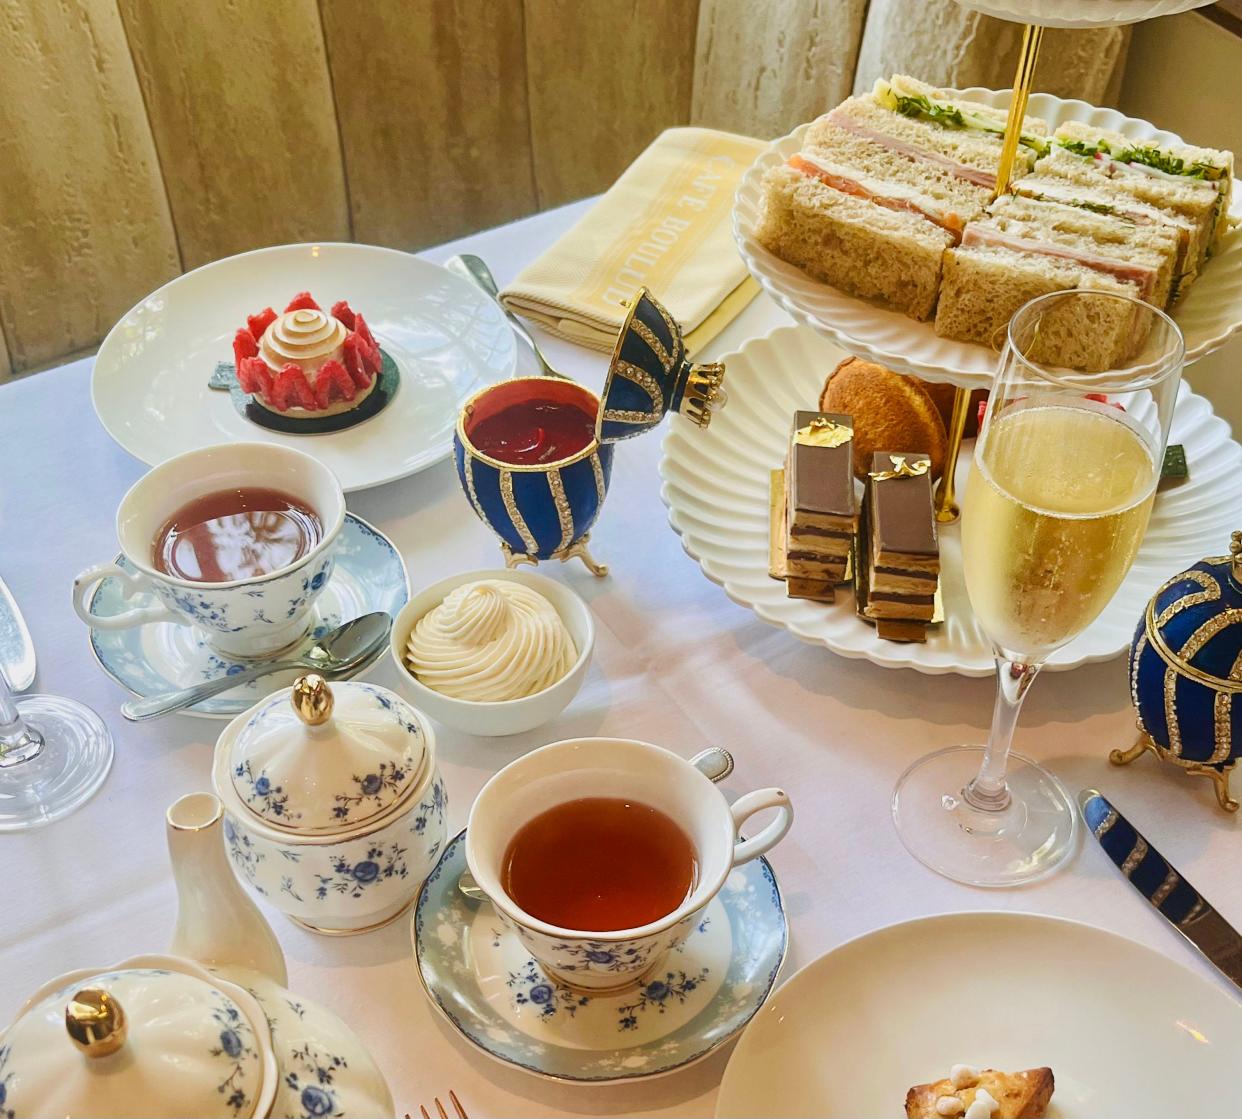 Café Boulud will launch its daily afternoon tea service on Thursday.